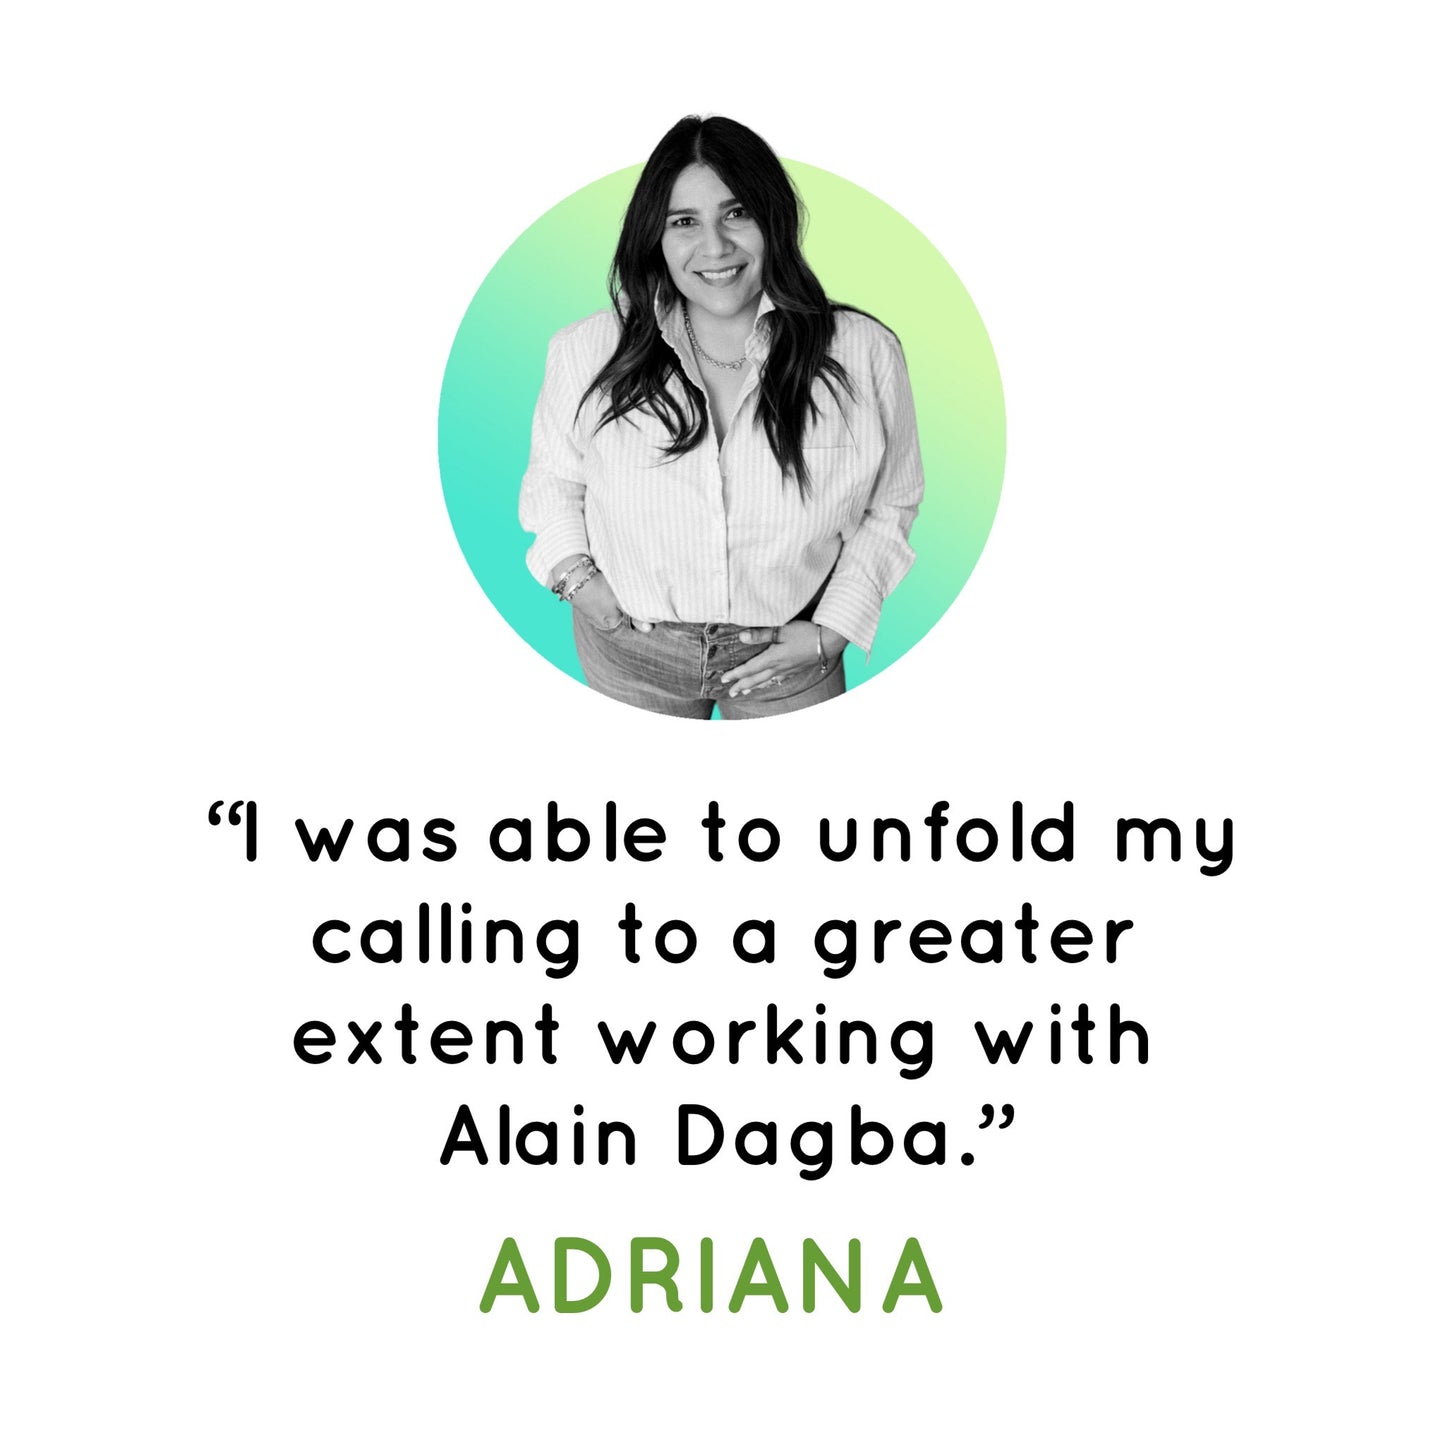 FREE 45 Minutes Clarity Call With Alain Dagba